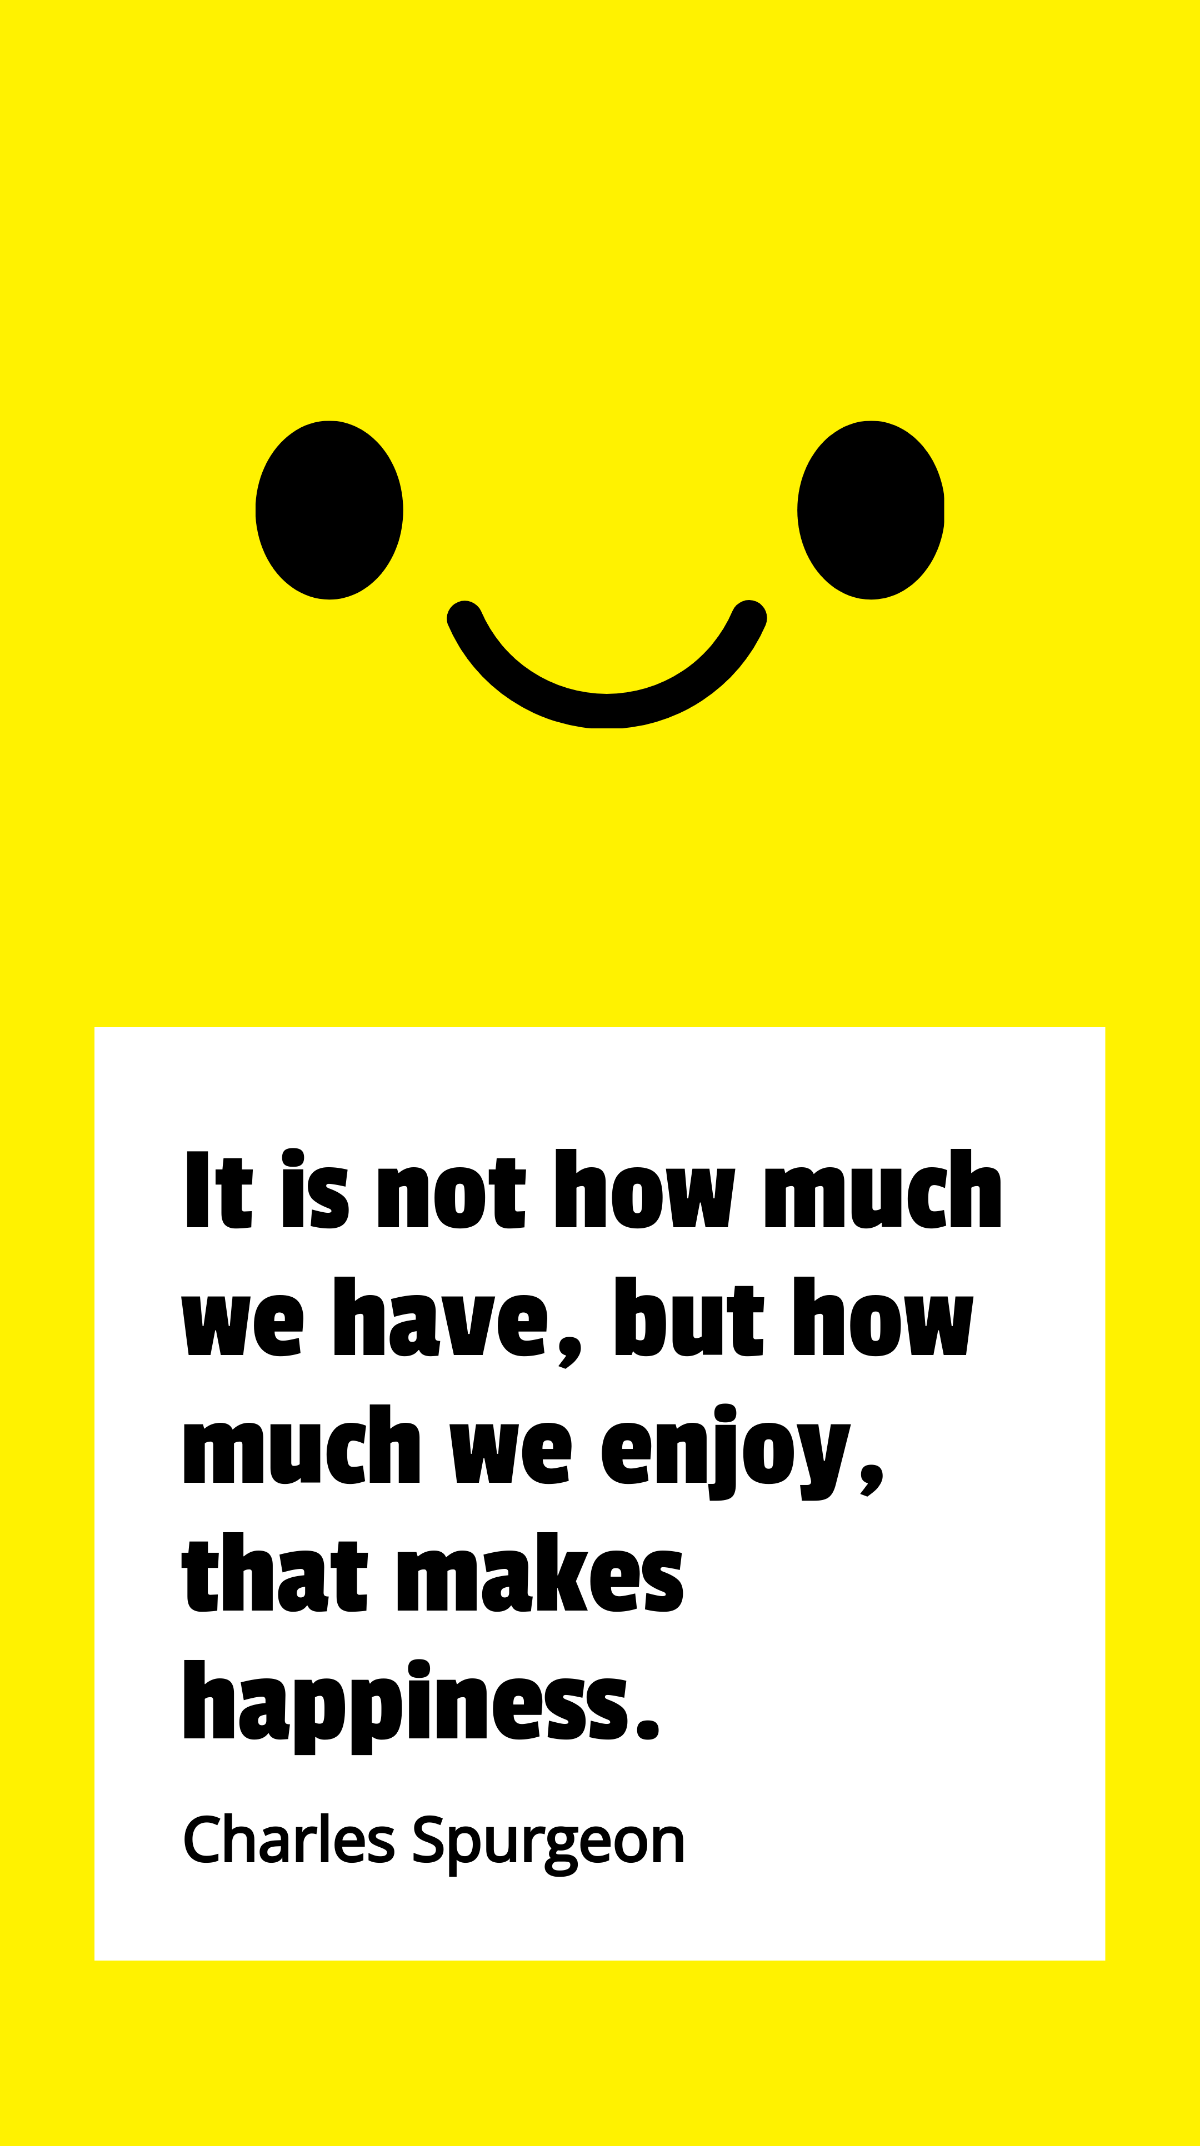 Charles Spurgeon - It is not how much we have, but how much we enjoy, that makes happiness. Template